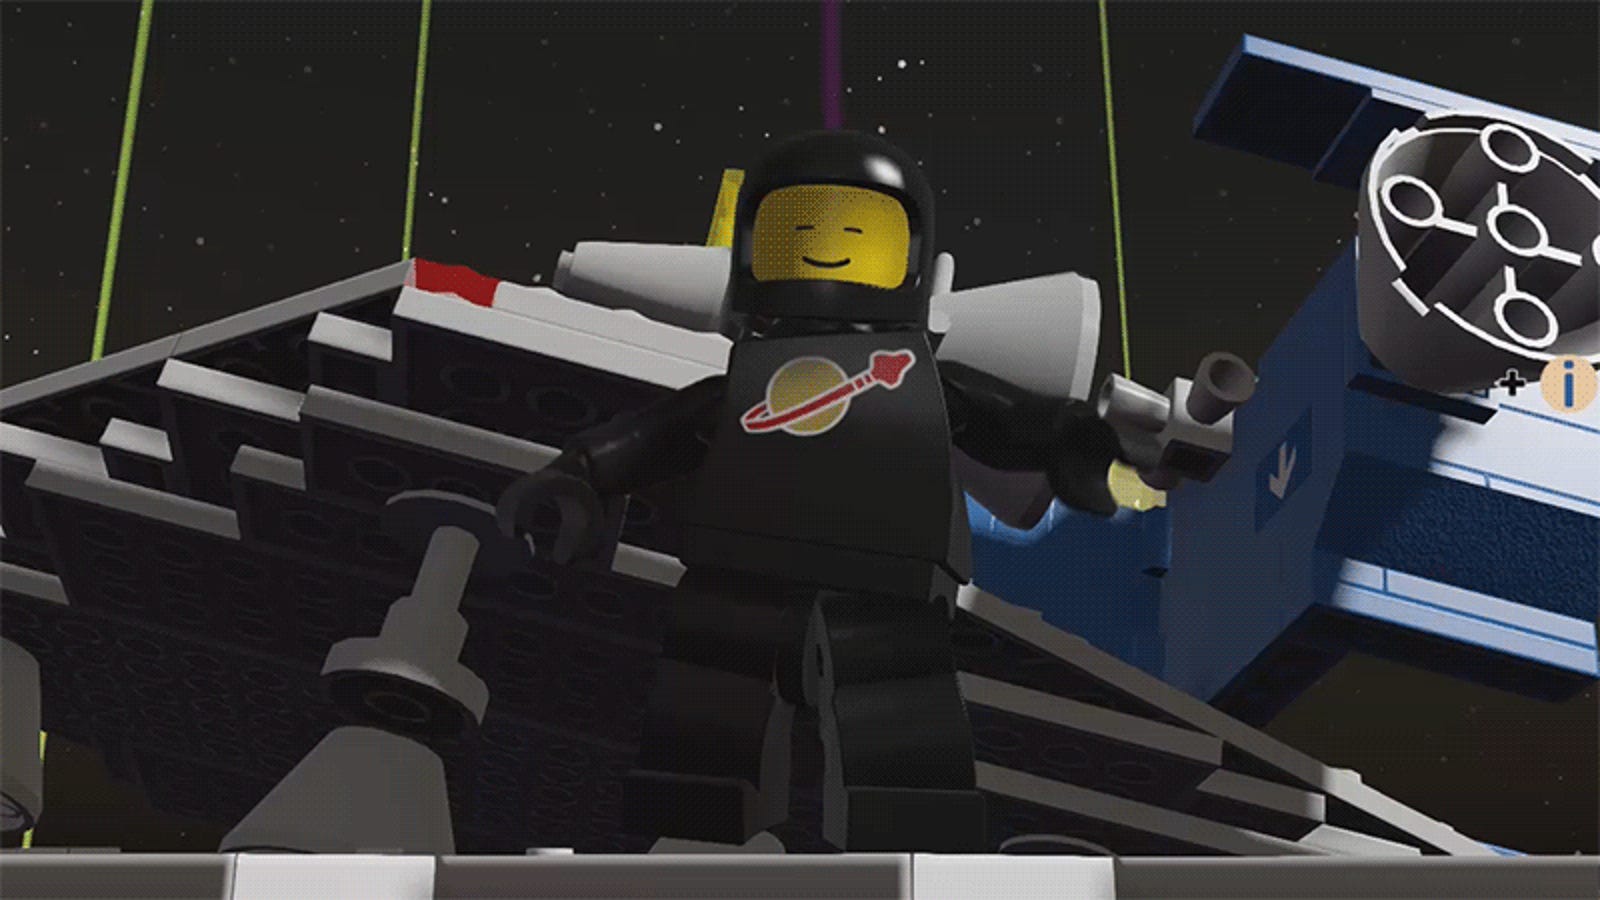 lego worlds download space xbox one